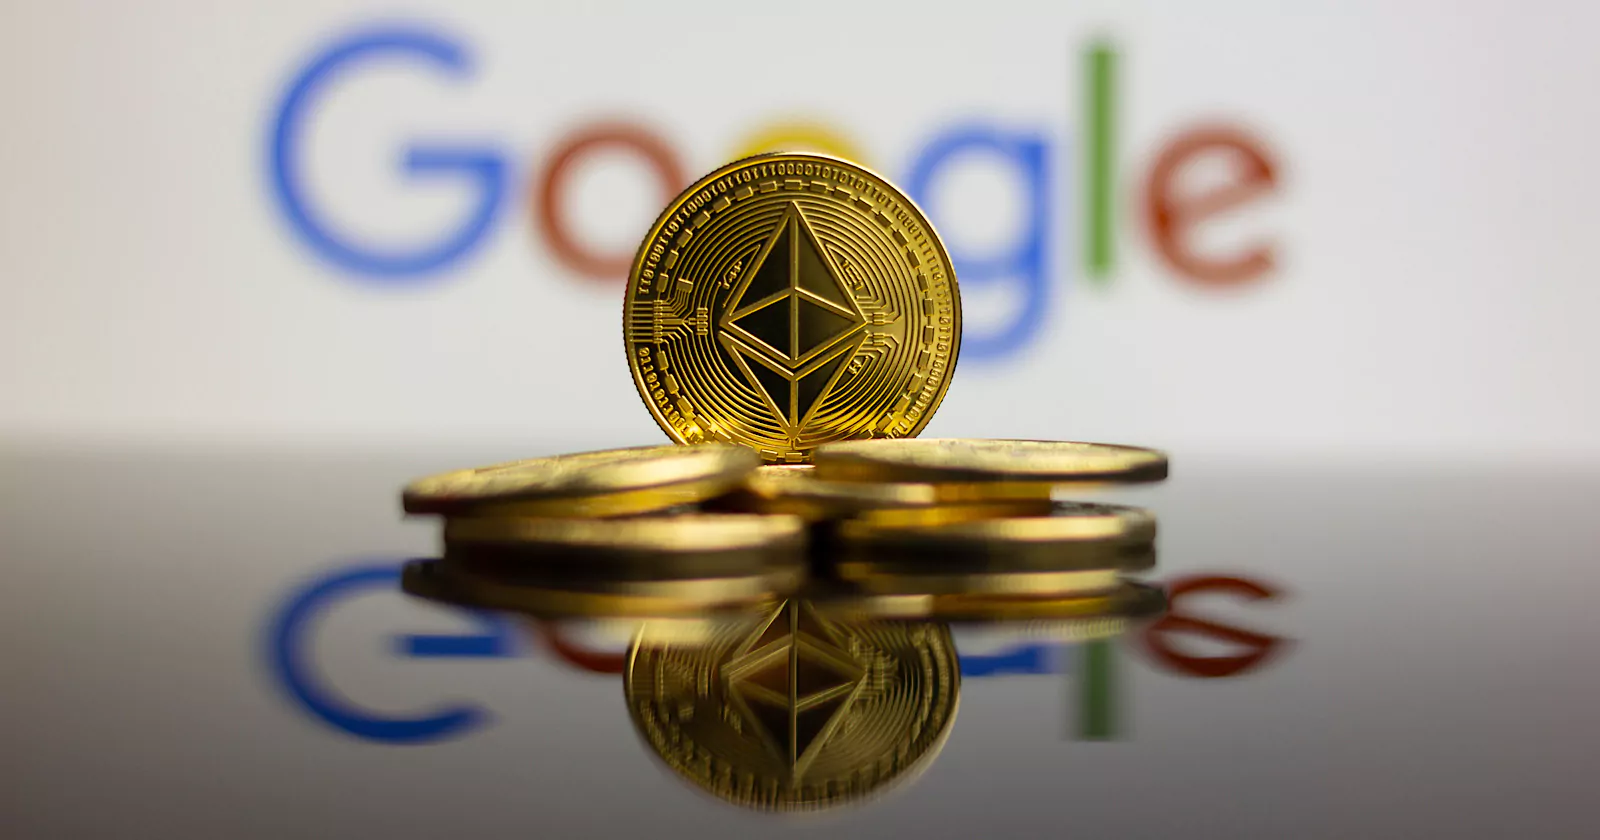 Google’s Policy Update on Cryptocurrency Advertising What You Need to Know